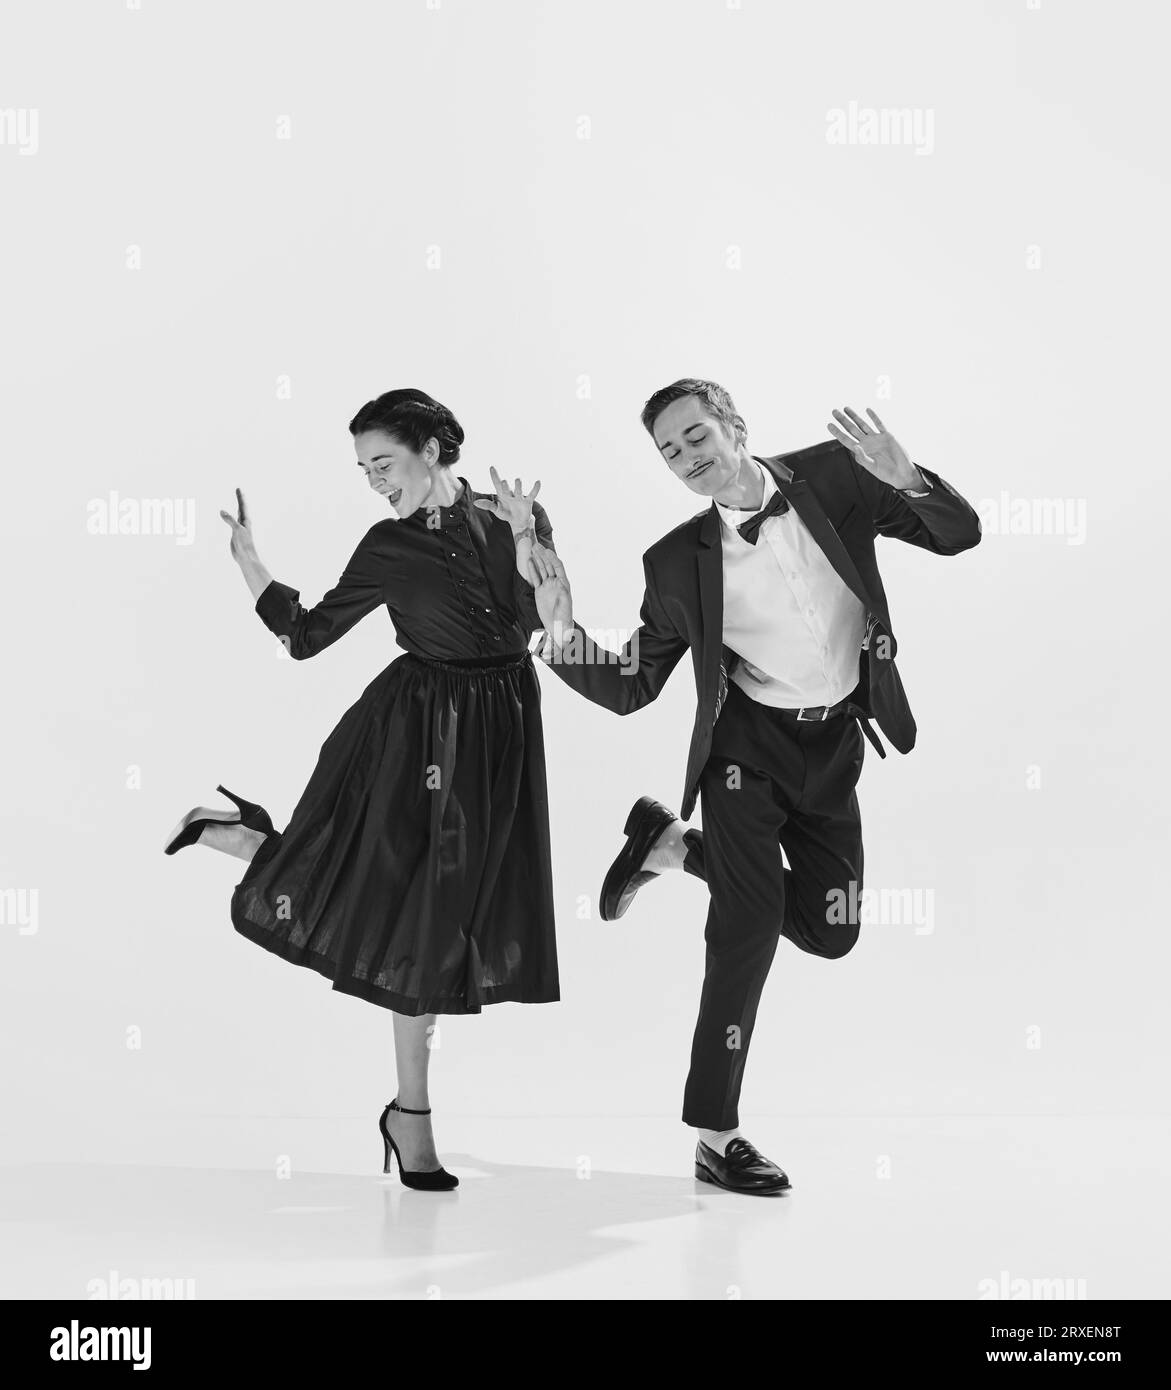 Rhythmic. Black and white. Stylish, elegant young couple, man and woman in stylus clothes dancing Stock Photo